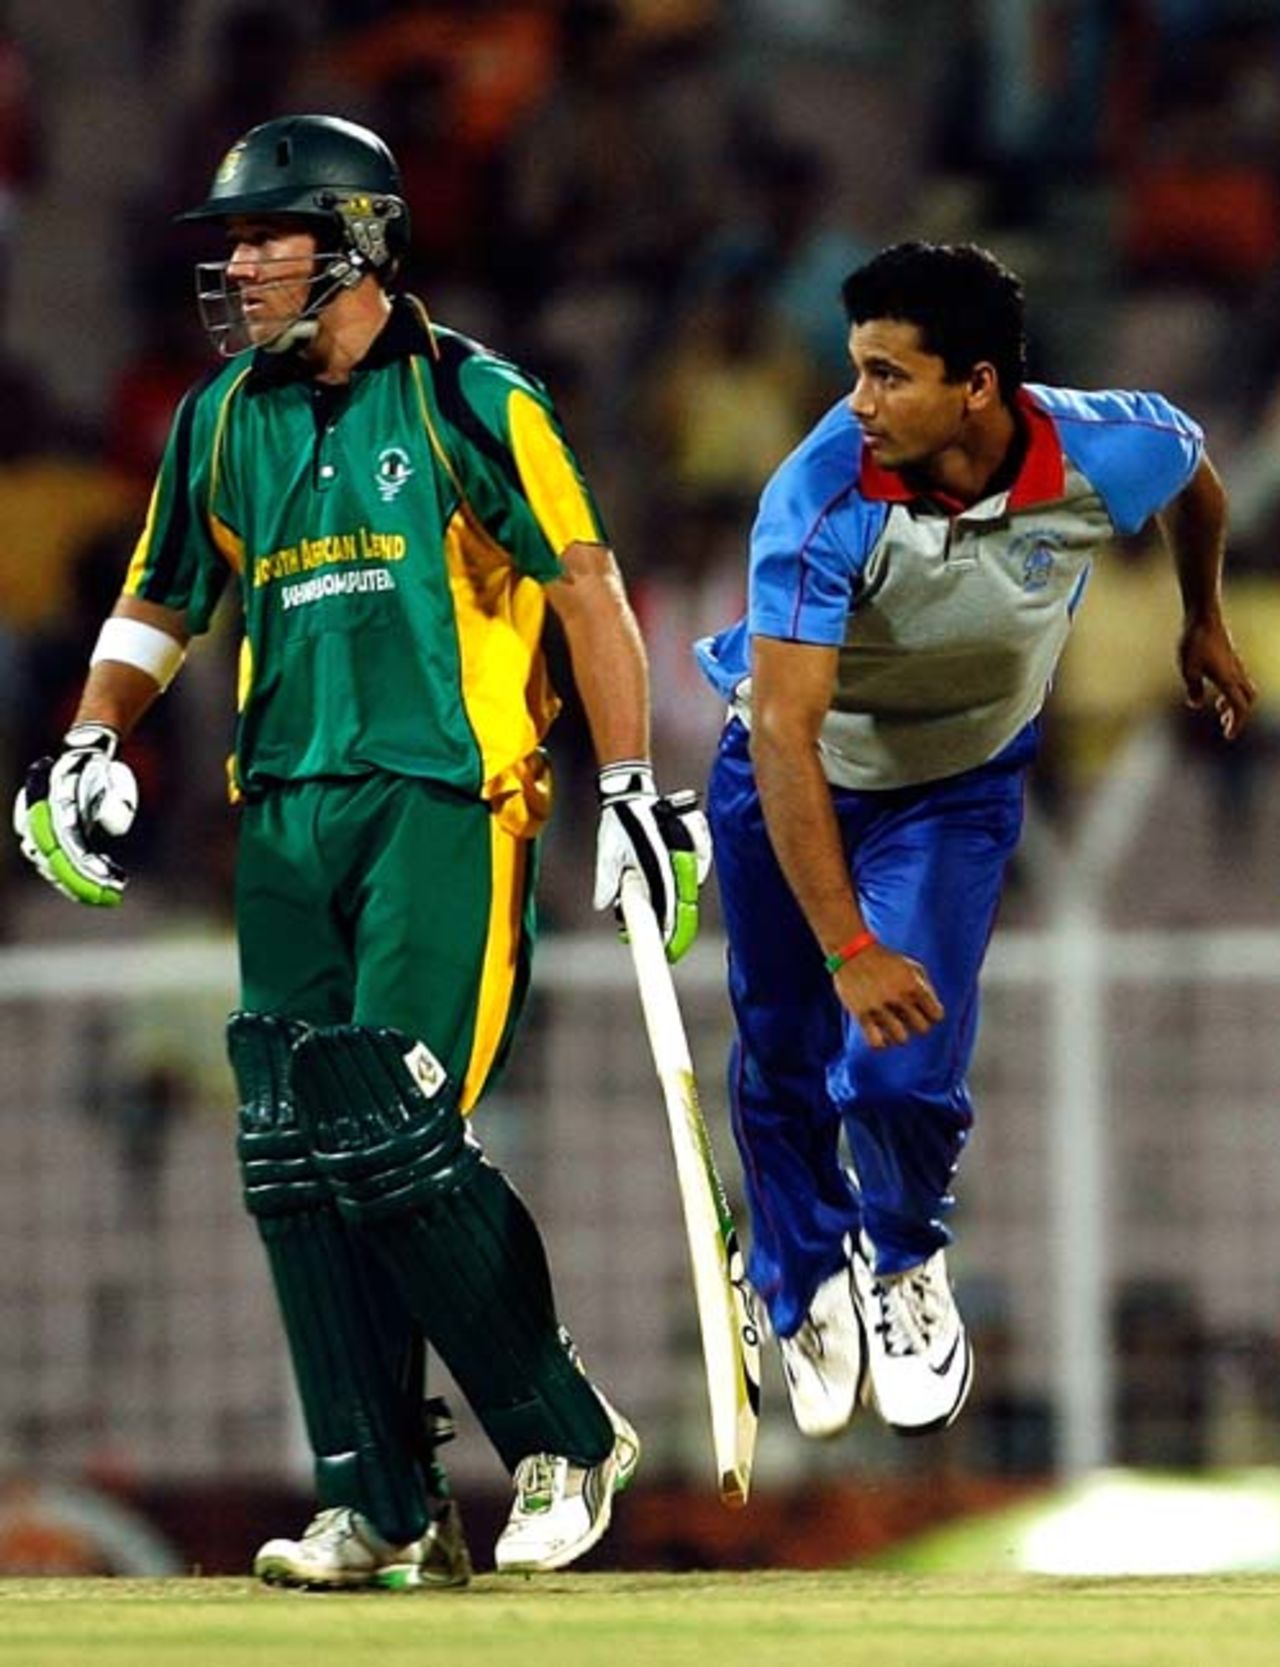 AB deVilliers looks on as  Mashrafe Mortaza is in his follow through during the third ODI of the Afro-Asia Cup at Chennai, June 10, 2007